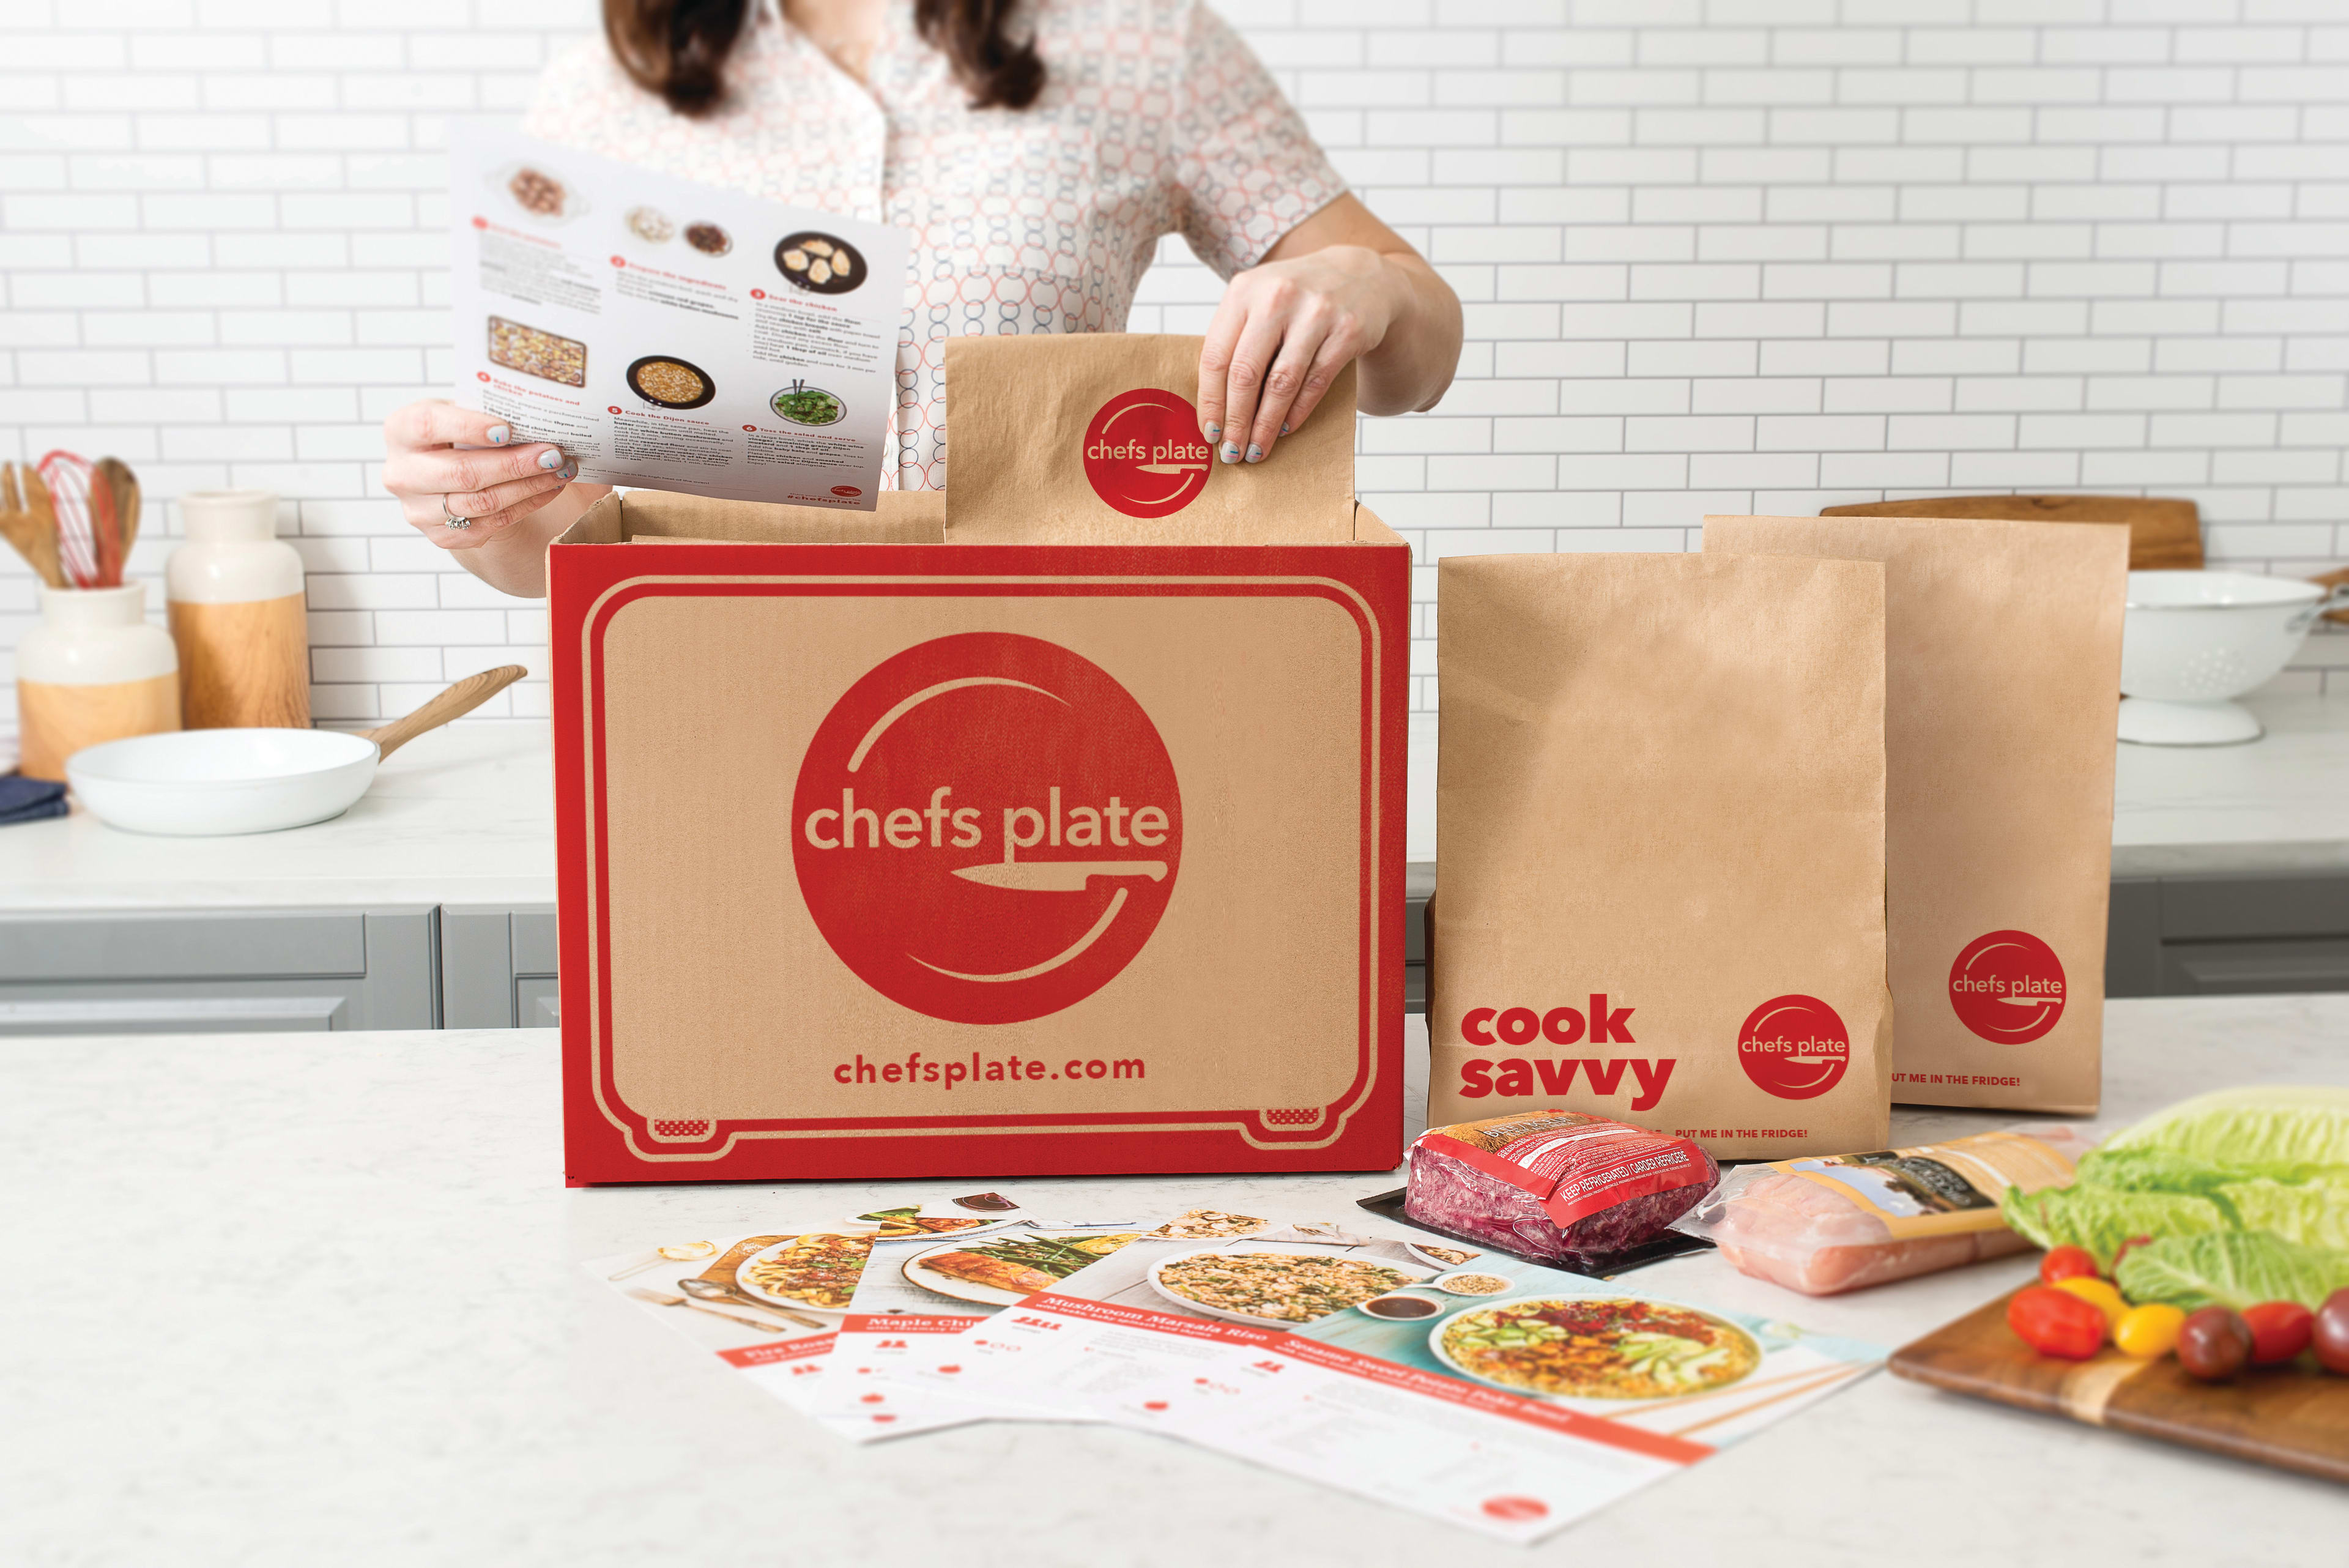 <h2>Reduce Food Waste With Chefs Plate</h2>